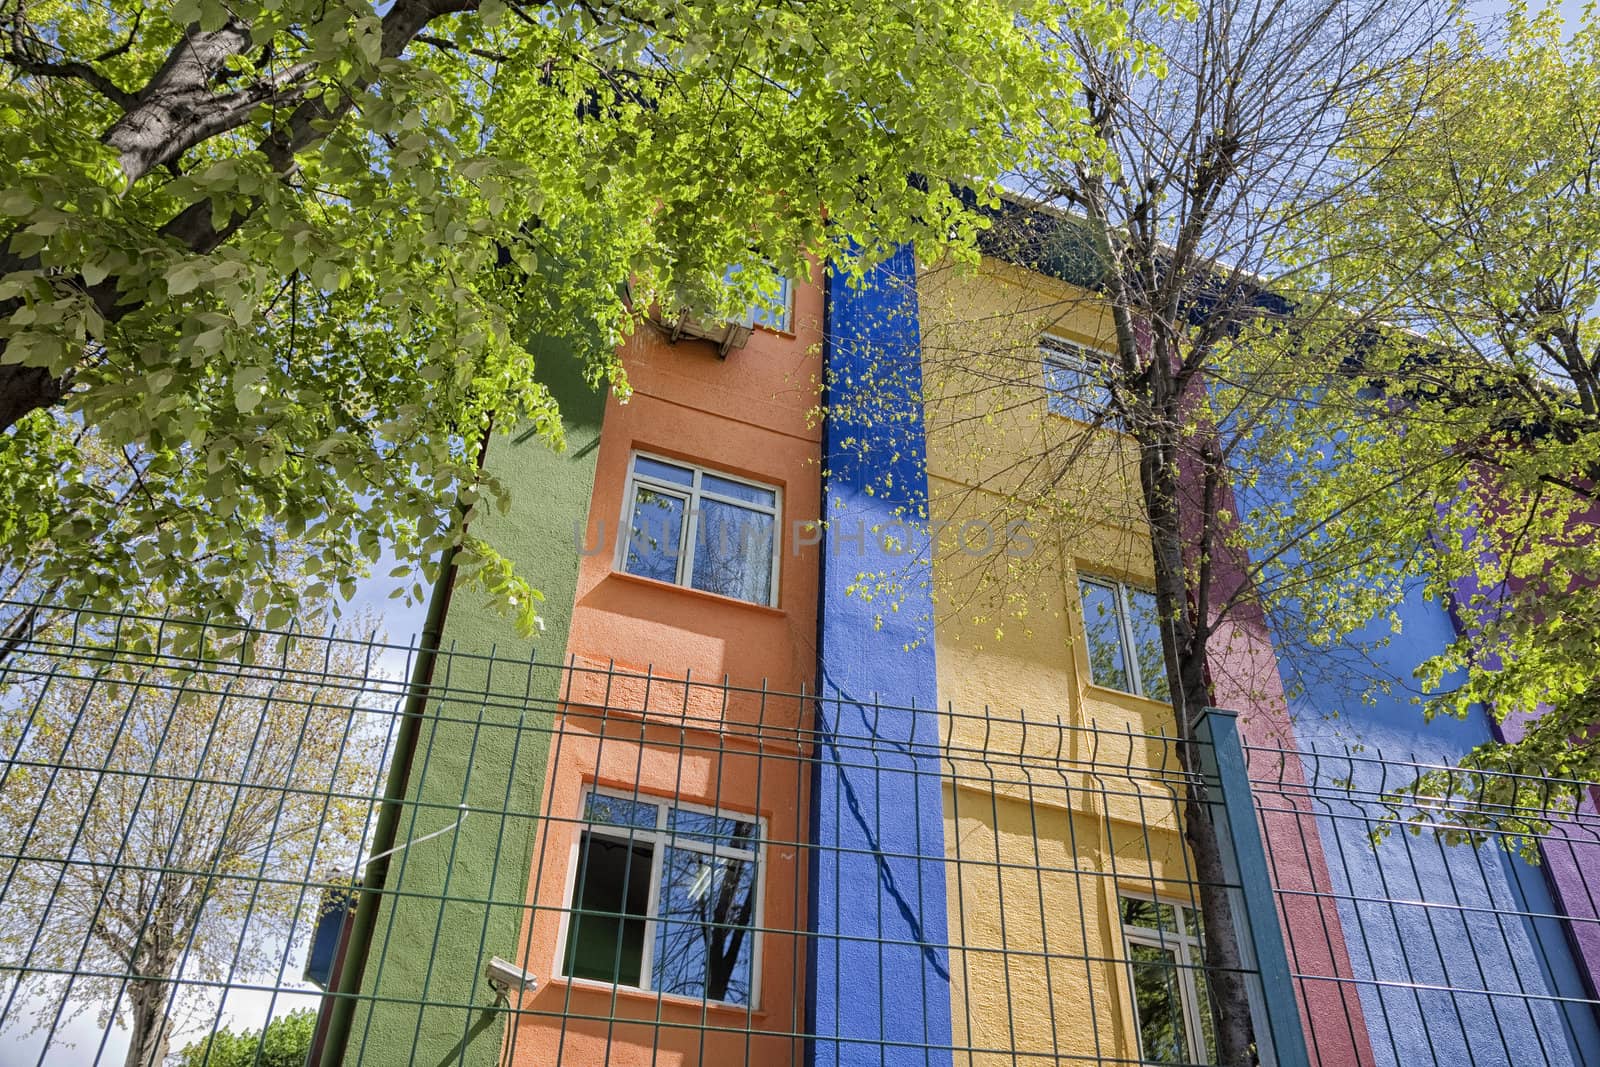 School building at springtime in the Uskudar area of Istanbul, Turkey.